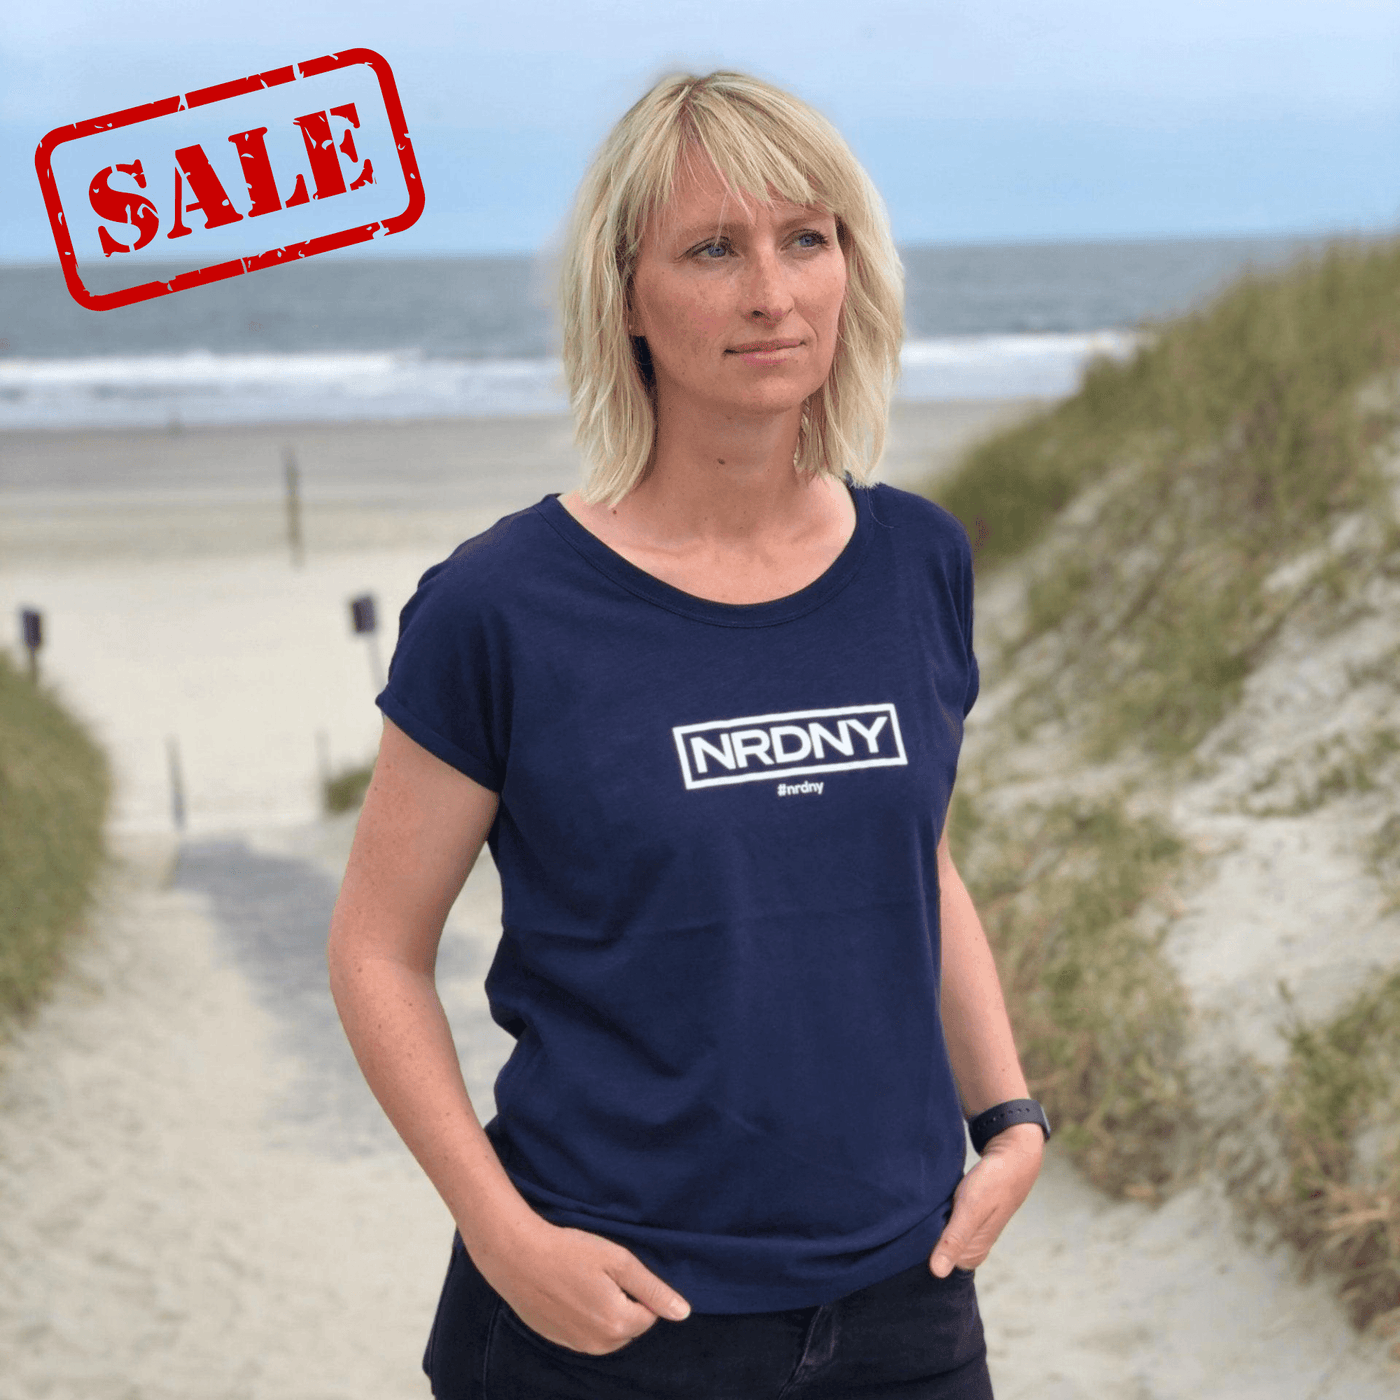 Norderney Shirt Women Rolled Up Navy - NRDNY